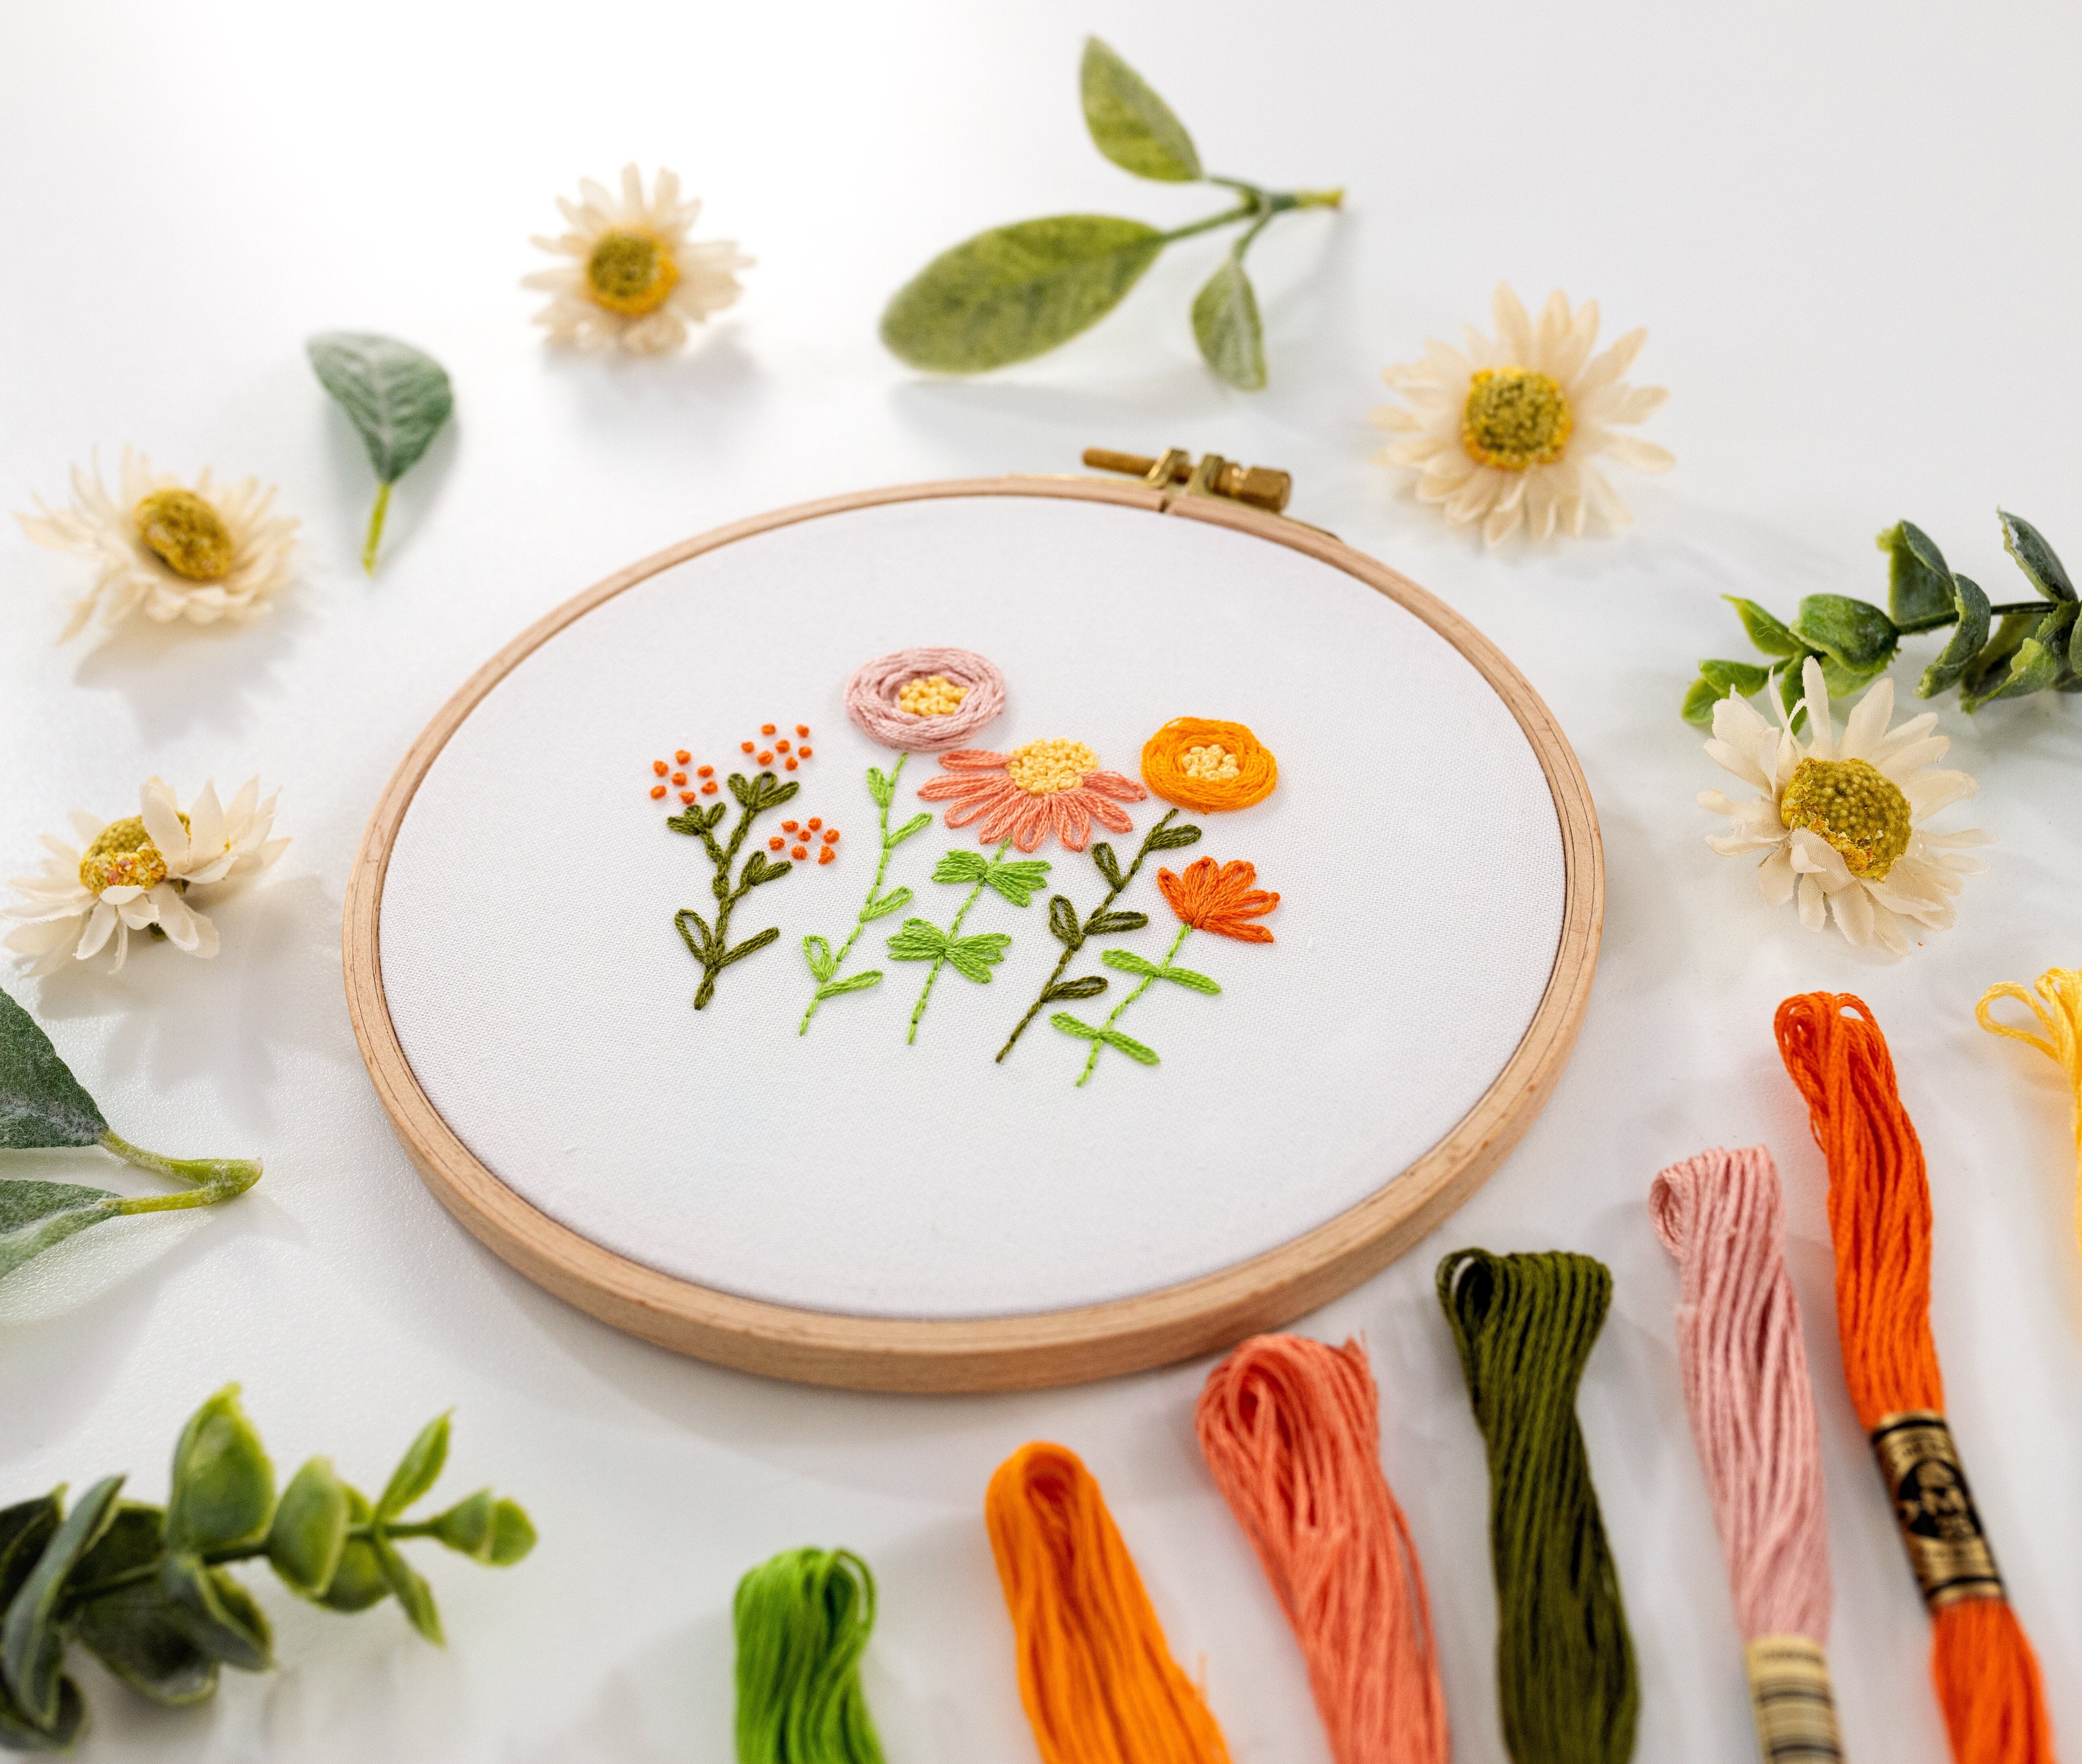 Here is a beginner embroidery pattern, Little Wildflower Meadow, framed in a hoop. This is available for purchase from the Clever Poppy Shop with the Modern Embroidery Foundations Course.